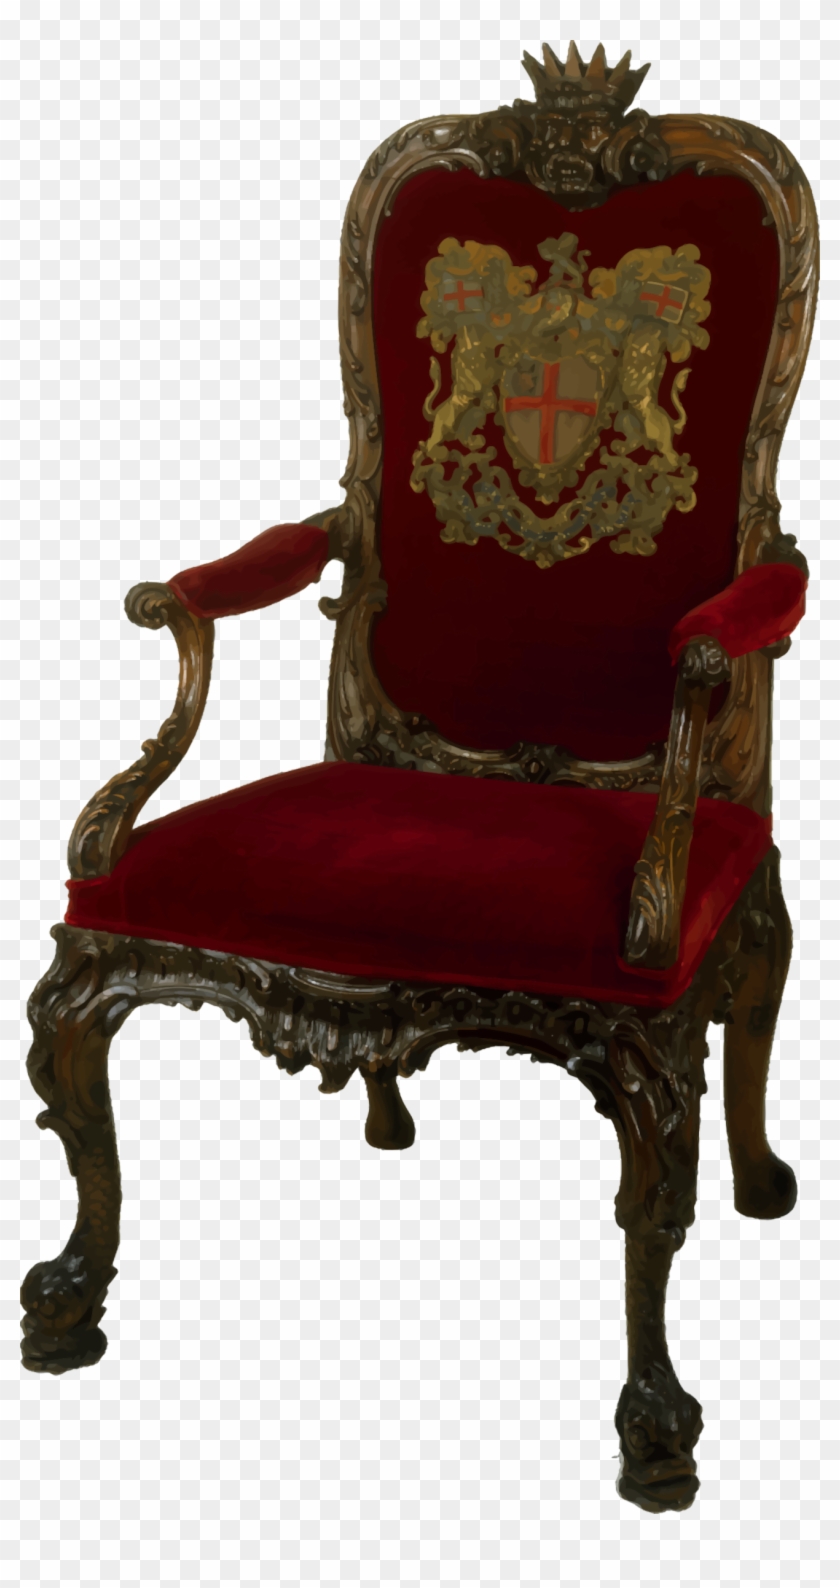 This Free Icons Png Design Of Ornate Walnut Chair Clipart #1889916